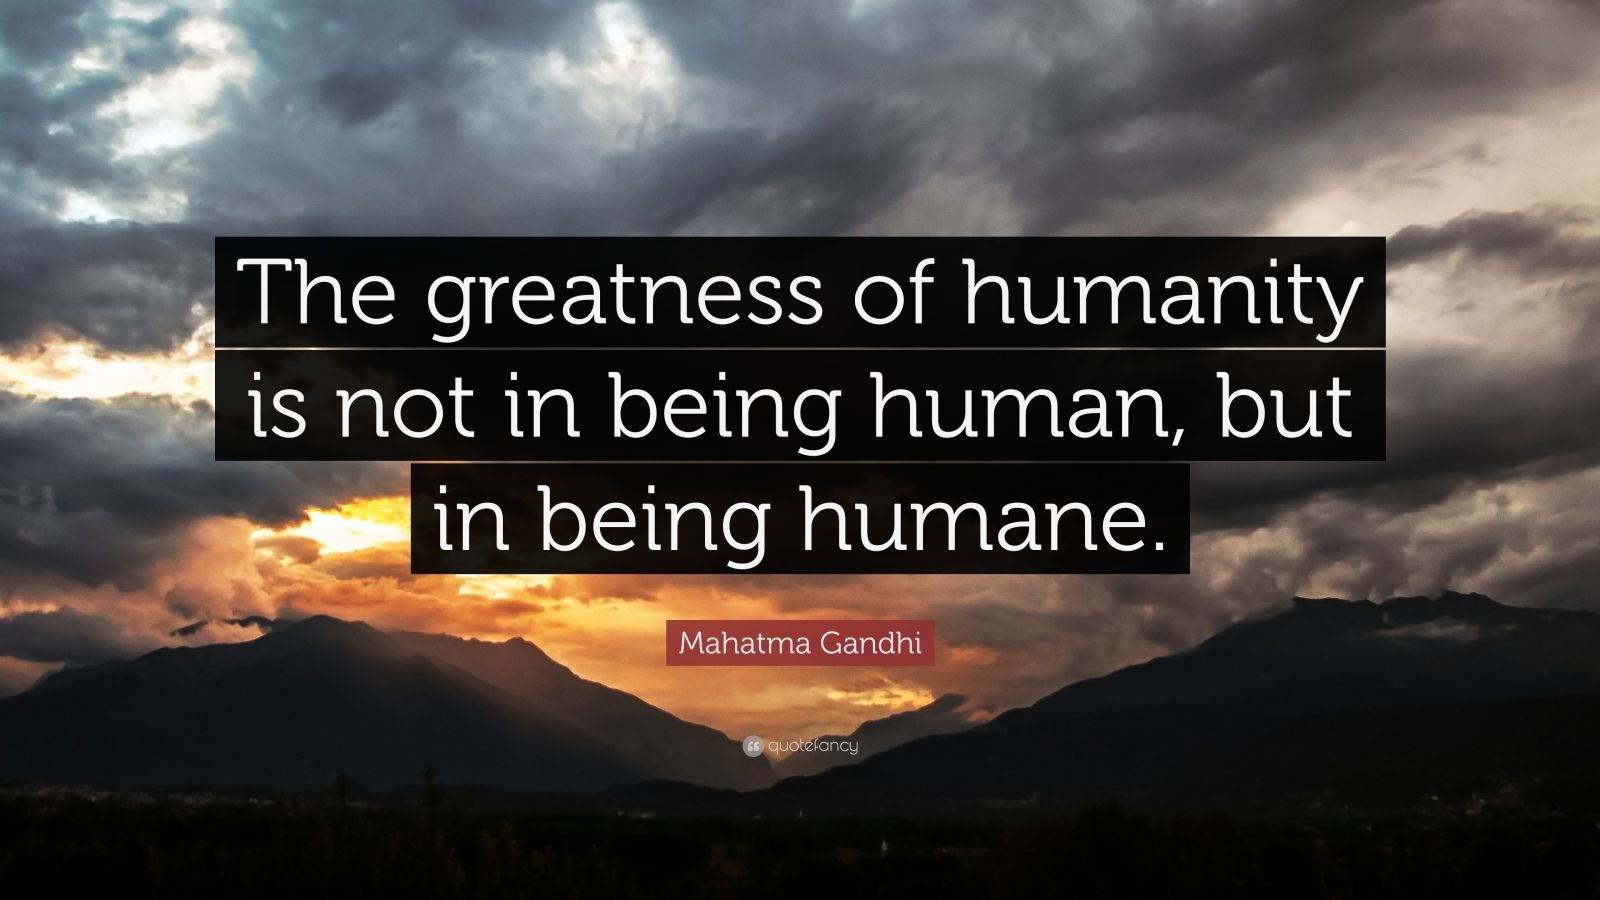 Mahatma Gandhi Quote: “The greatness of humanity is not in being human